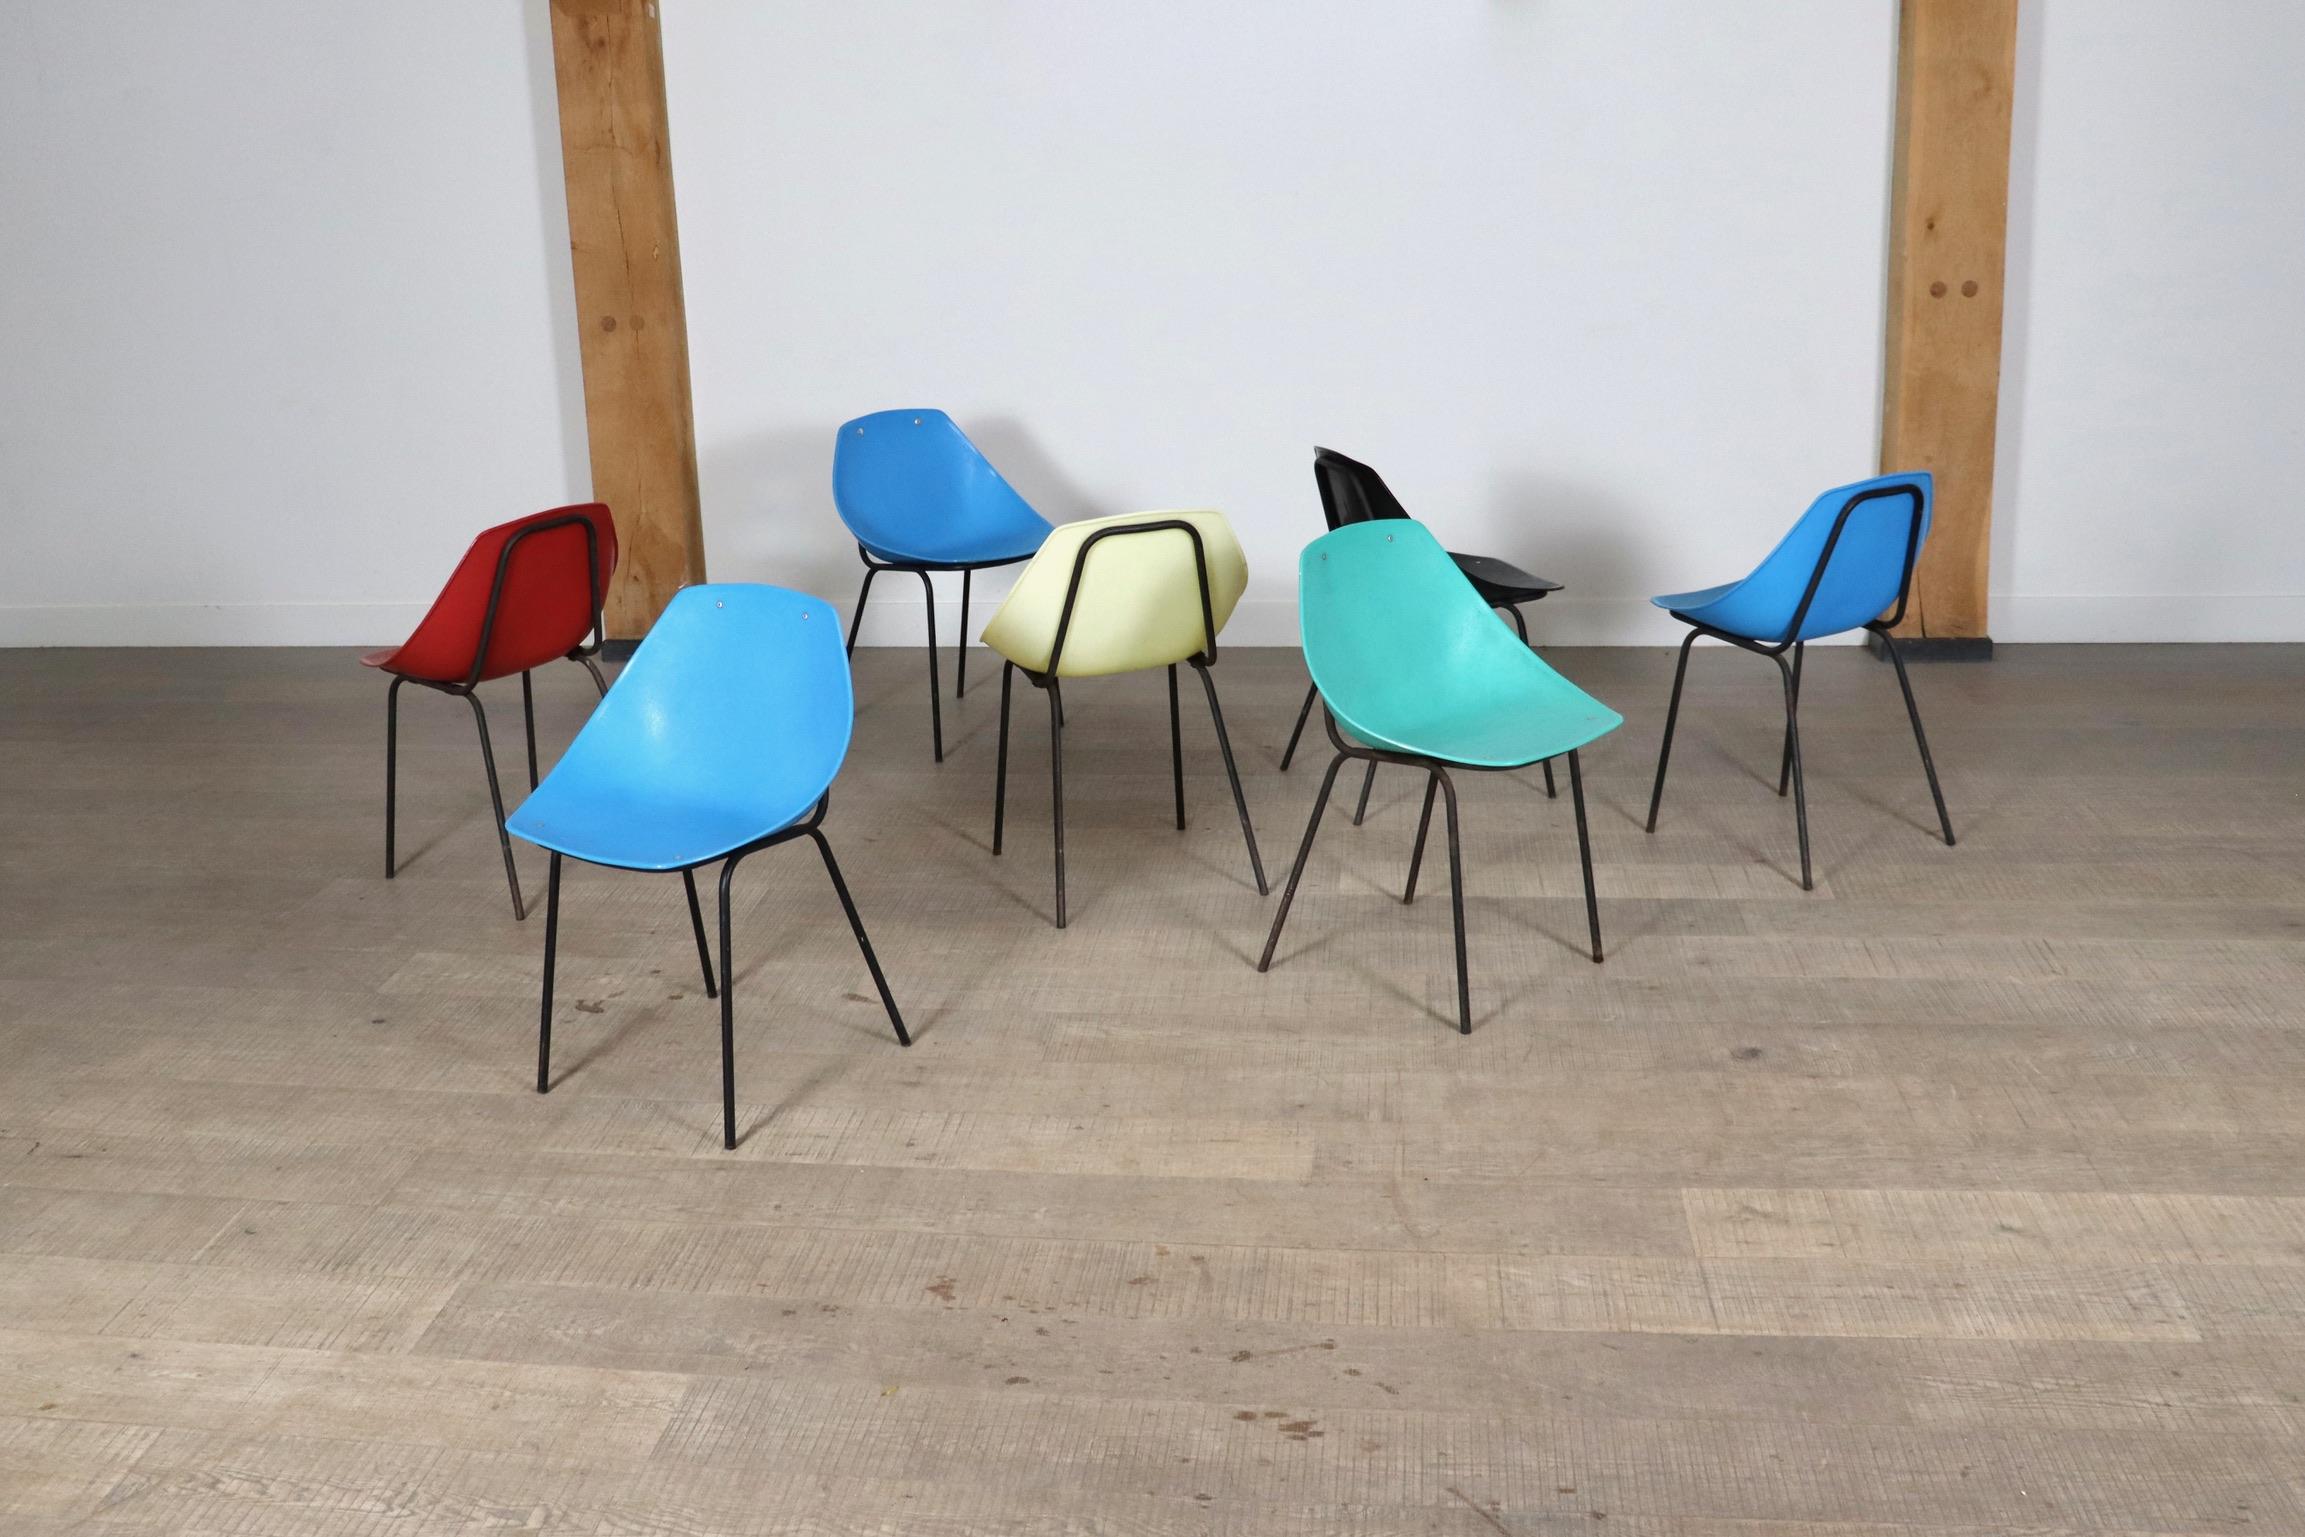 Steel Set Of 7 Vintage Coquillage Chairs By Pierre Guariche For Meurop, 1960s For Sale